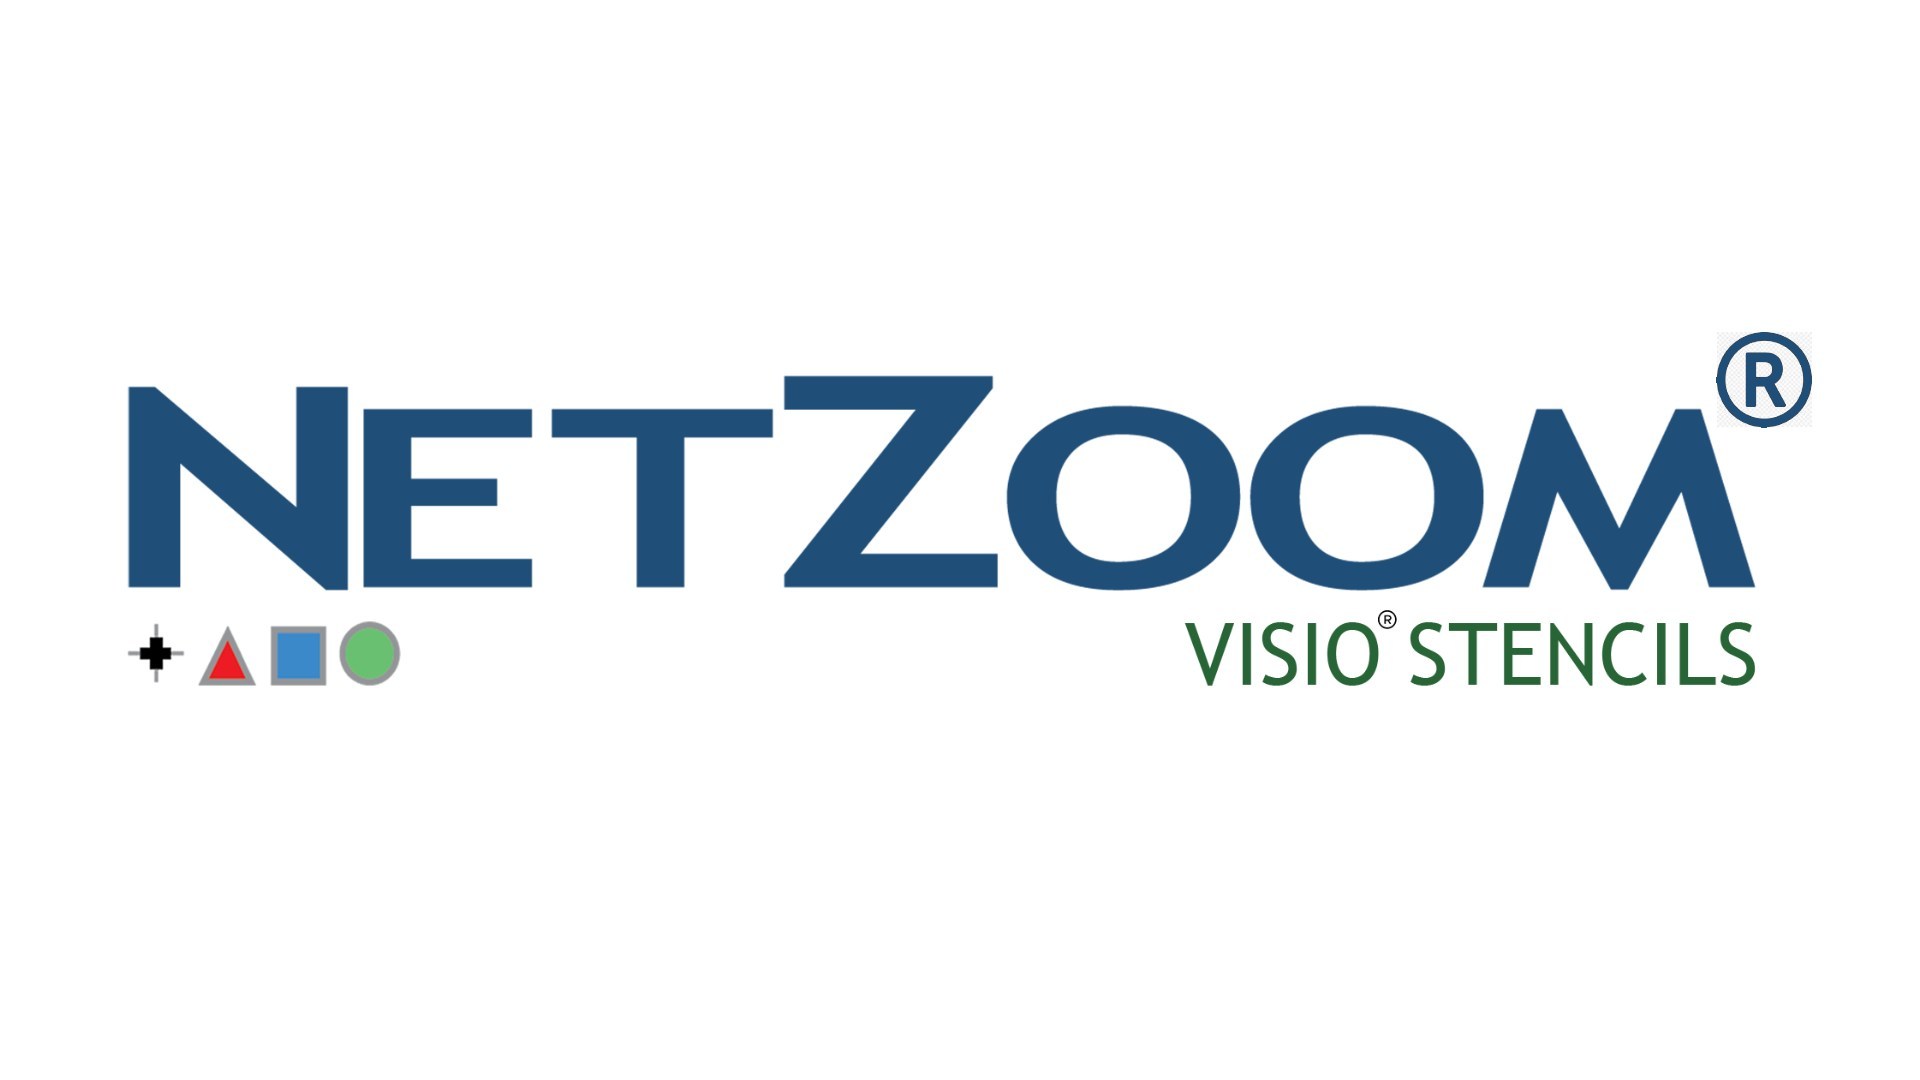 Netzoom Stencils Adds More Devices To The Largest Microsoft Visio Stencils Library